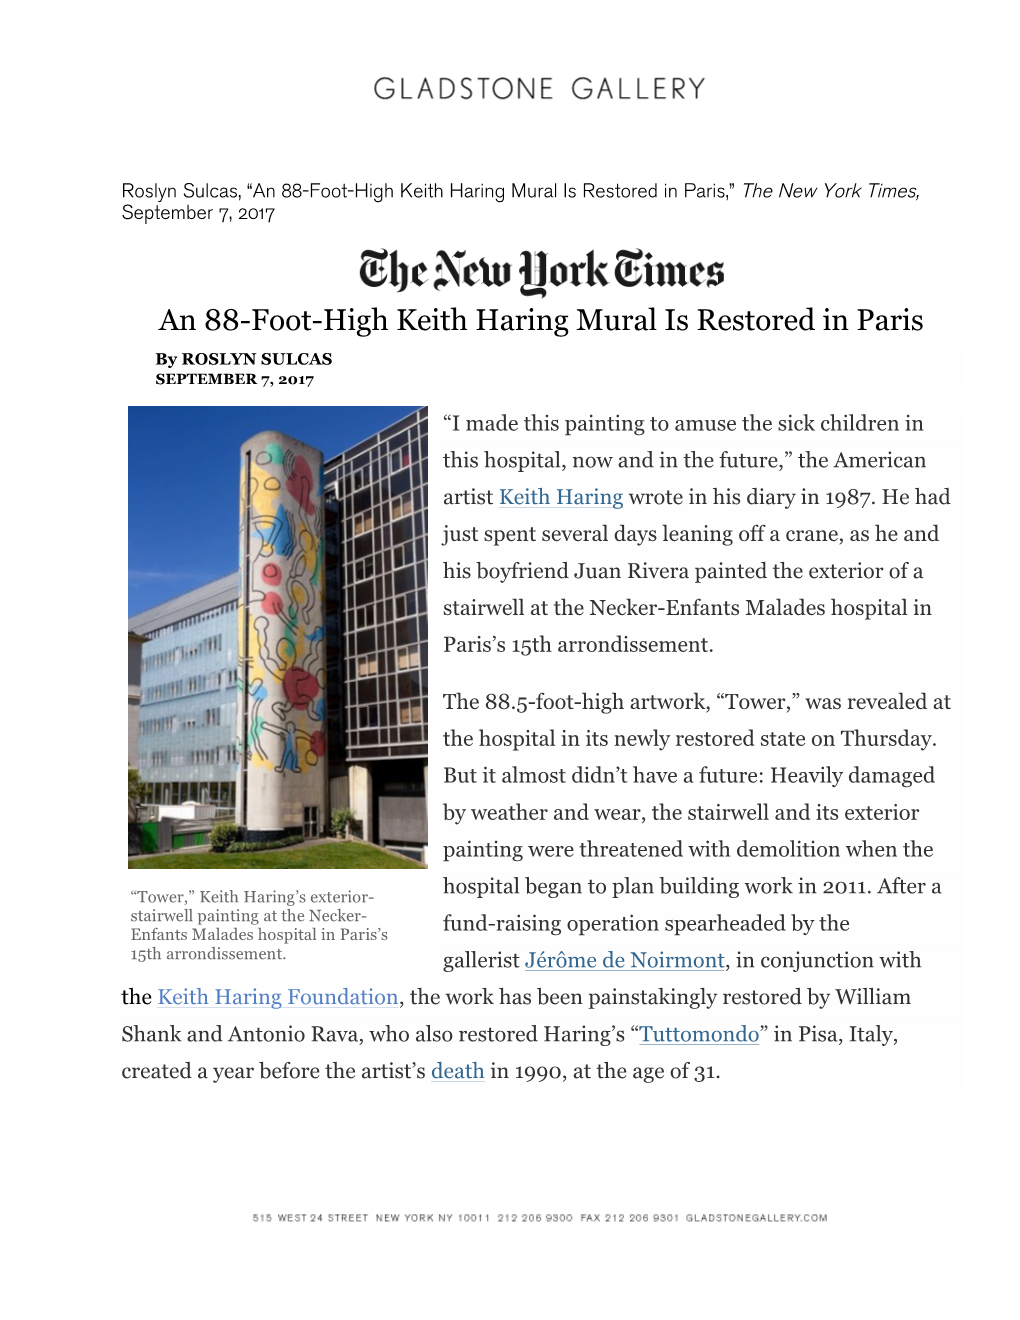 An 88-Foot-High Keith Haring Mural Is Restored in Paris,” the New York Times, September 7, 2017